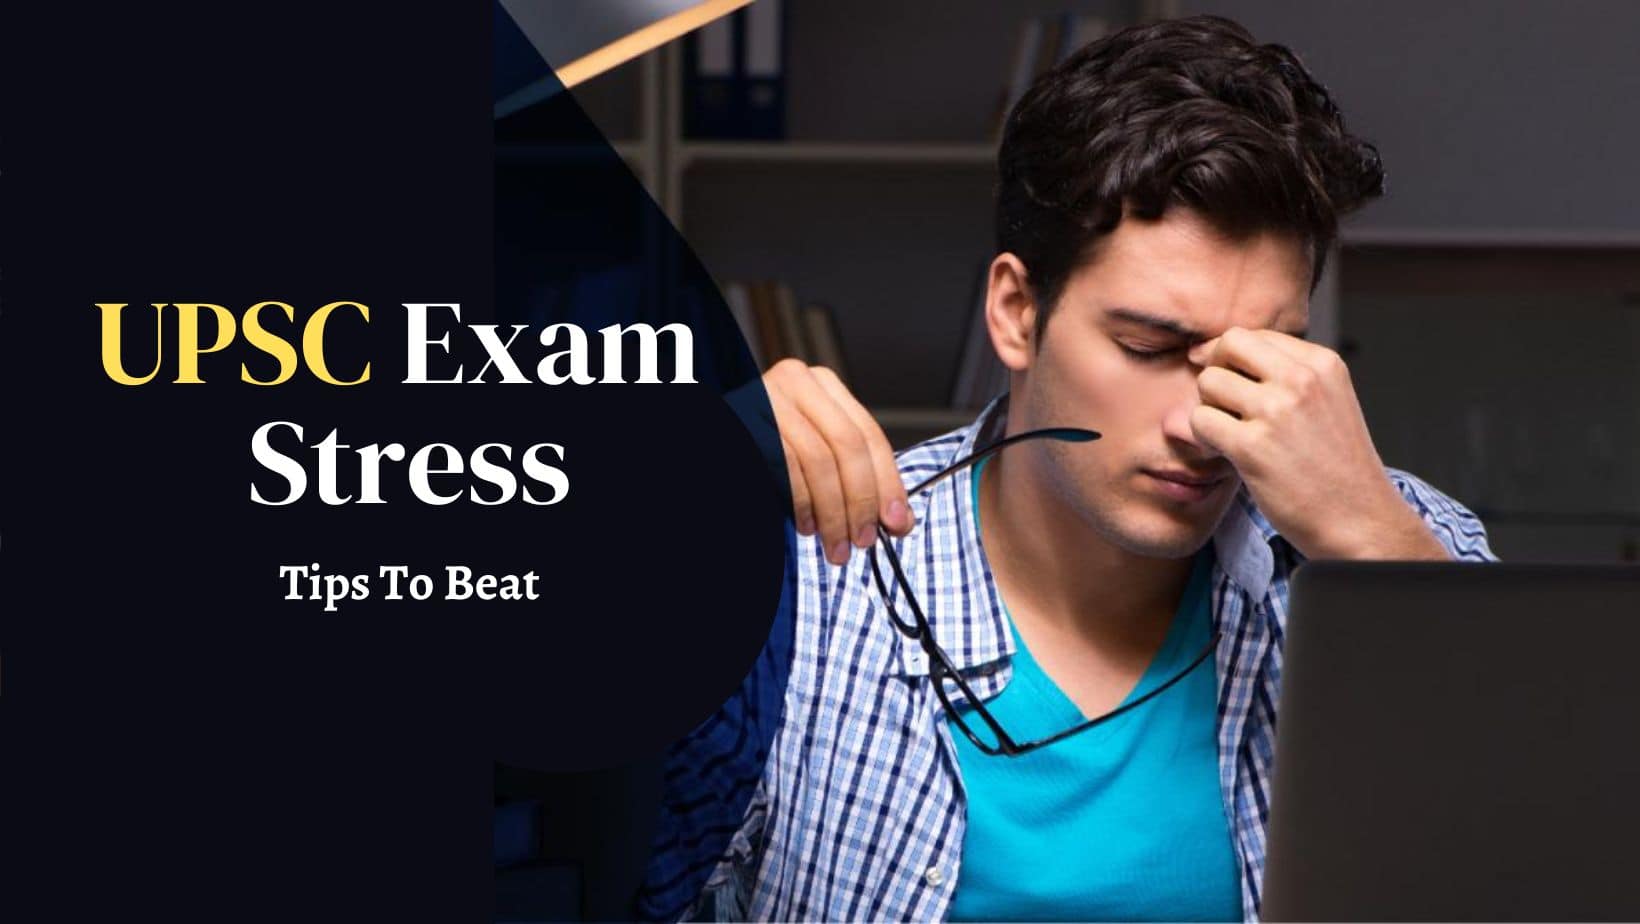 How To Deal With Anxiety During UPSC Preparation?